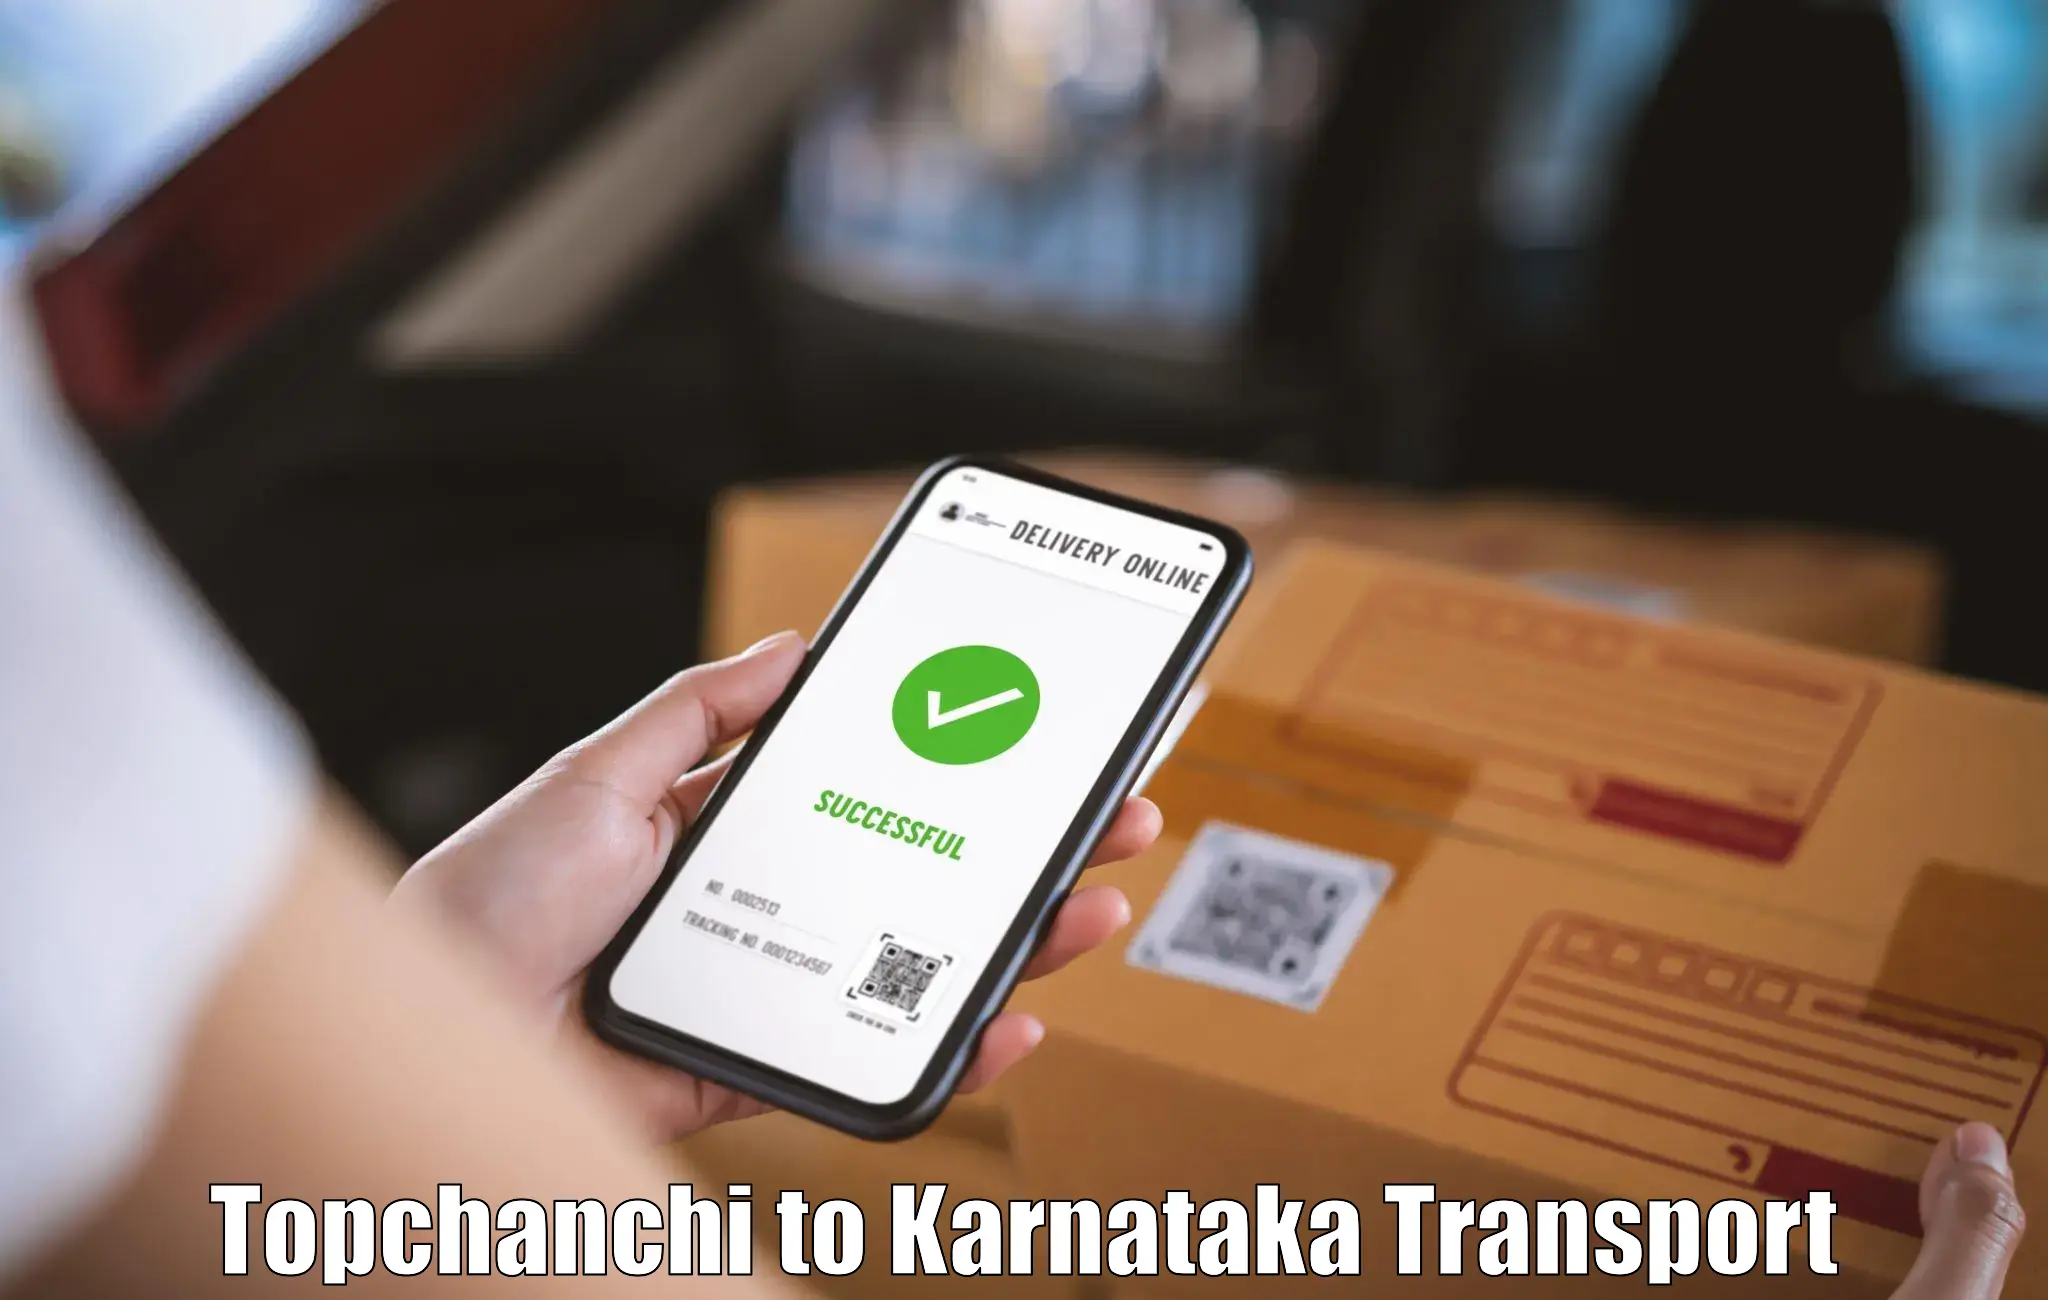 Material transport services Topchanchi to Manipal